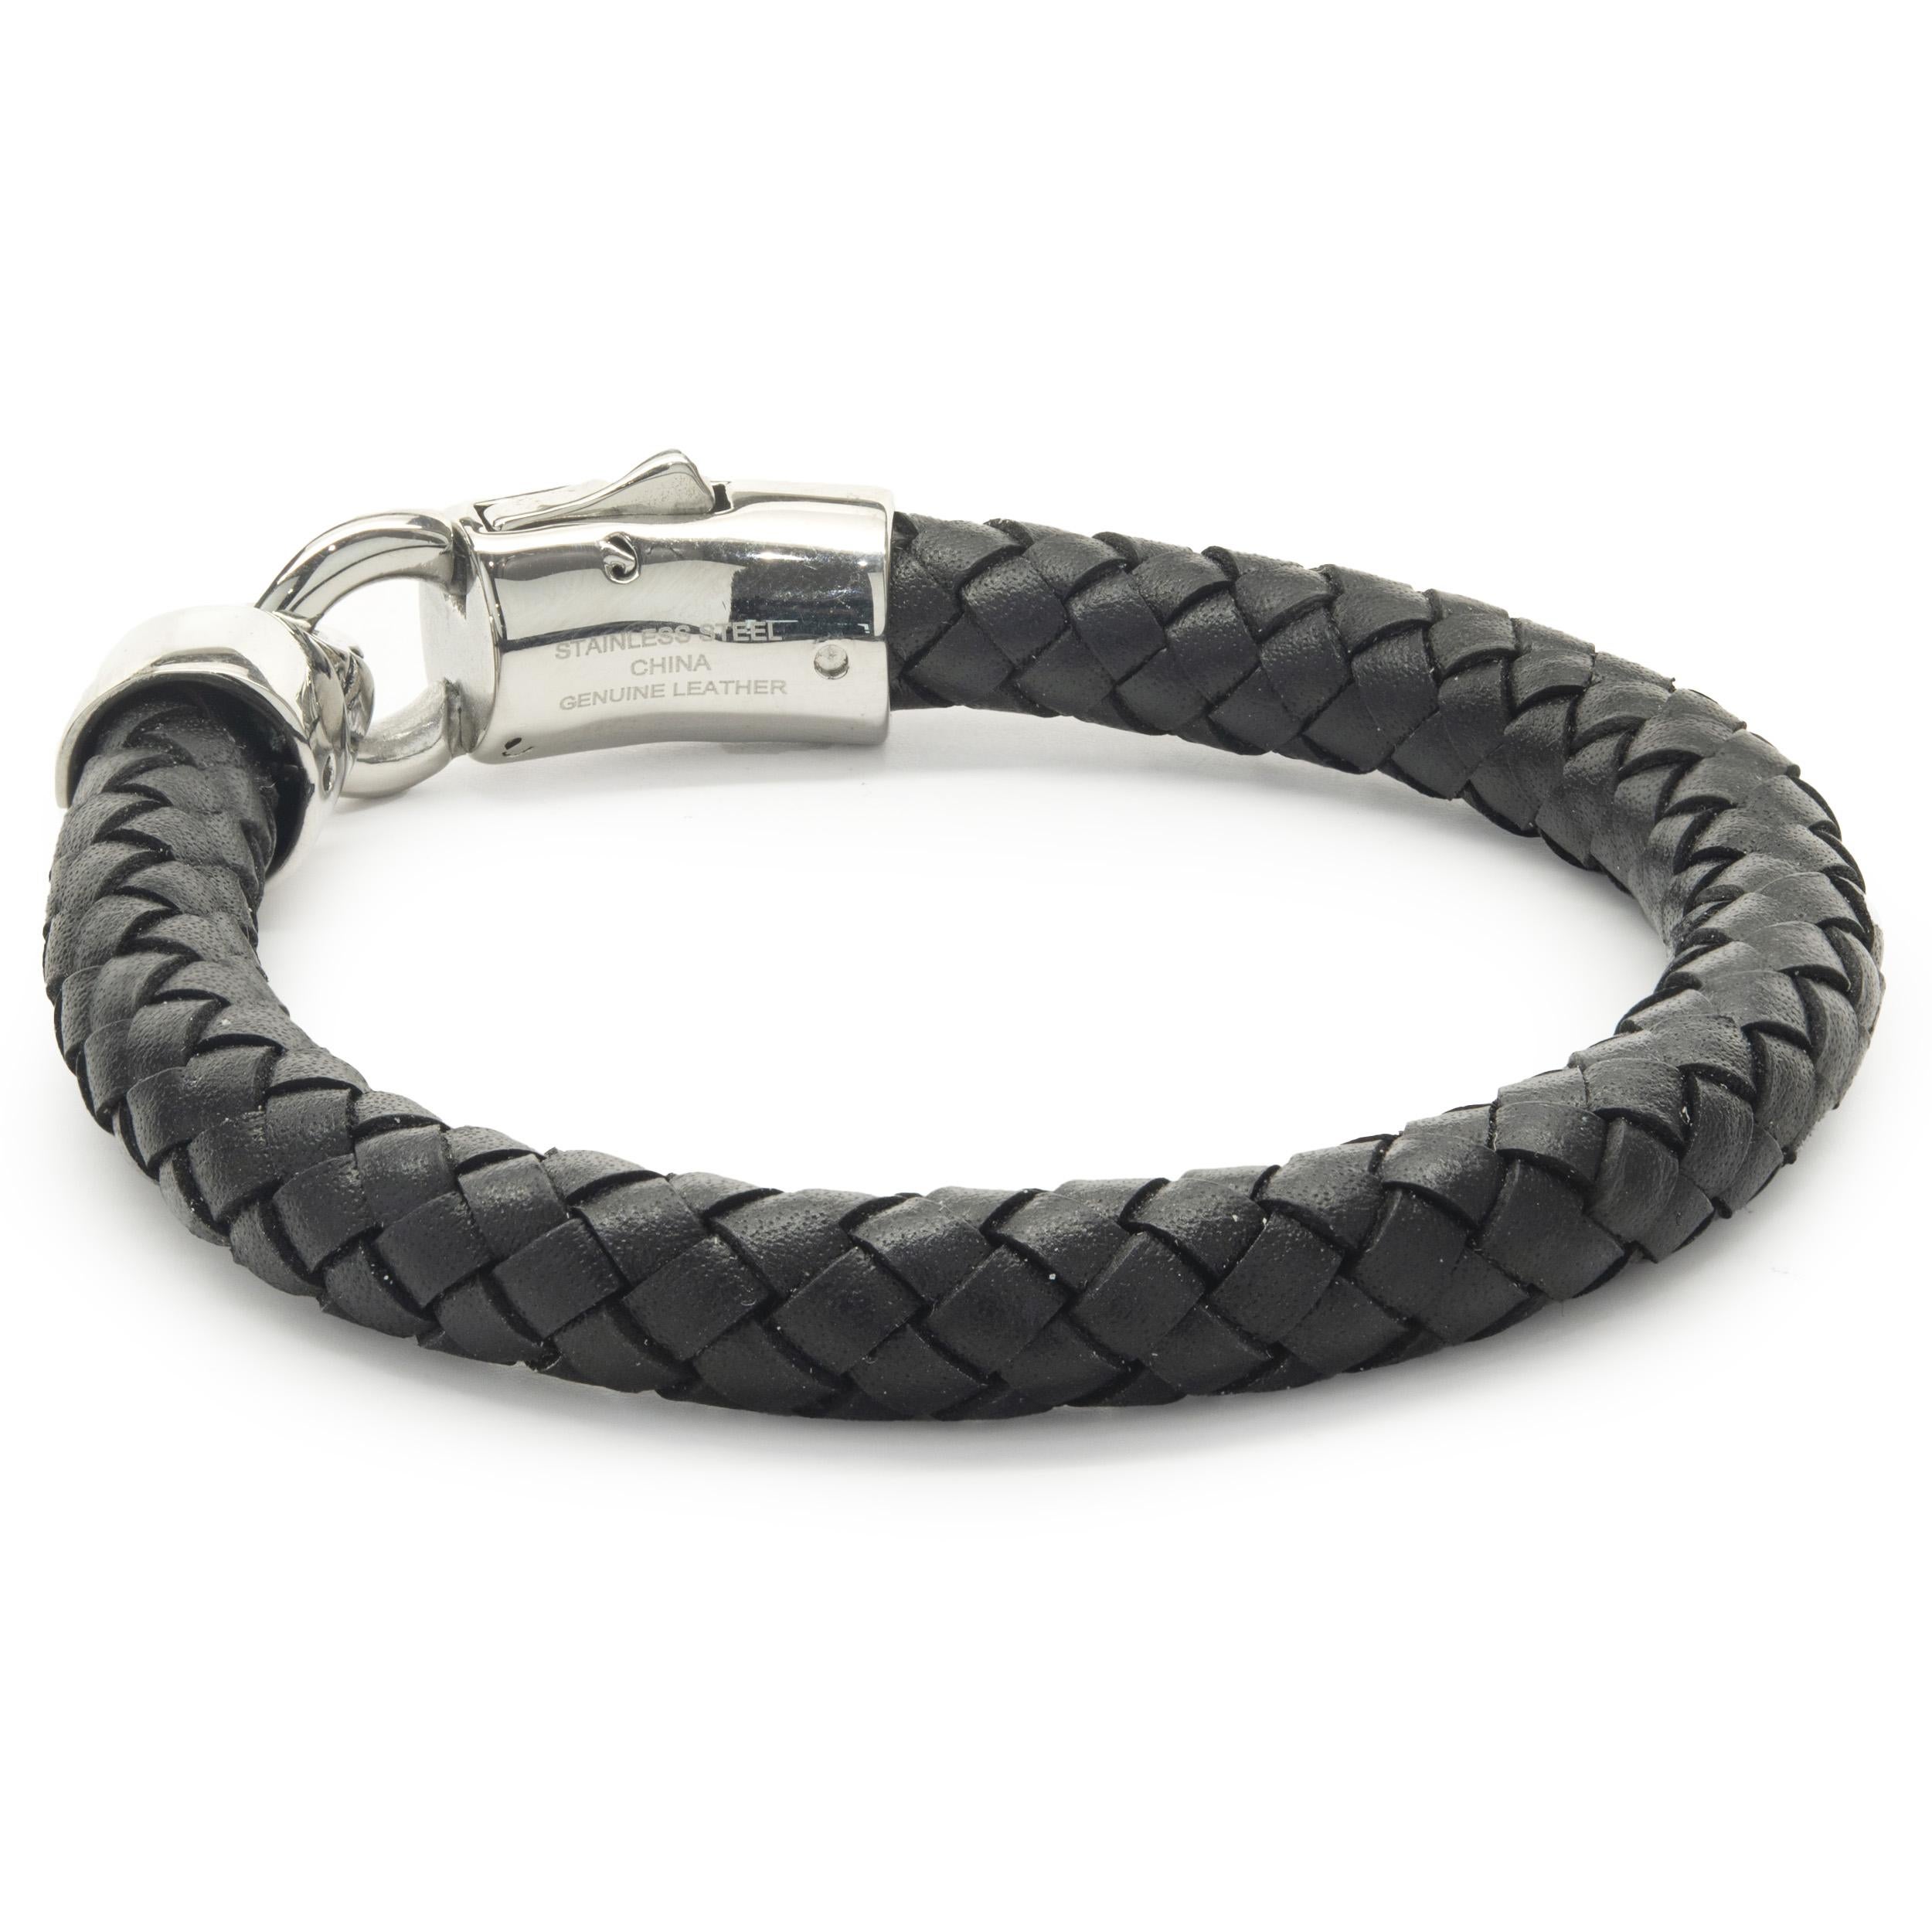 Designer: custom 
Material: leather, stainless
Dimensions: bracelet will fit up to a 6.5-inch wrist
Weight: 22.19 grams